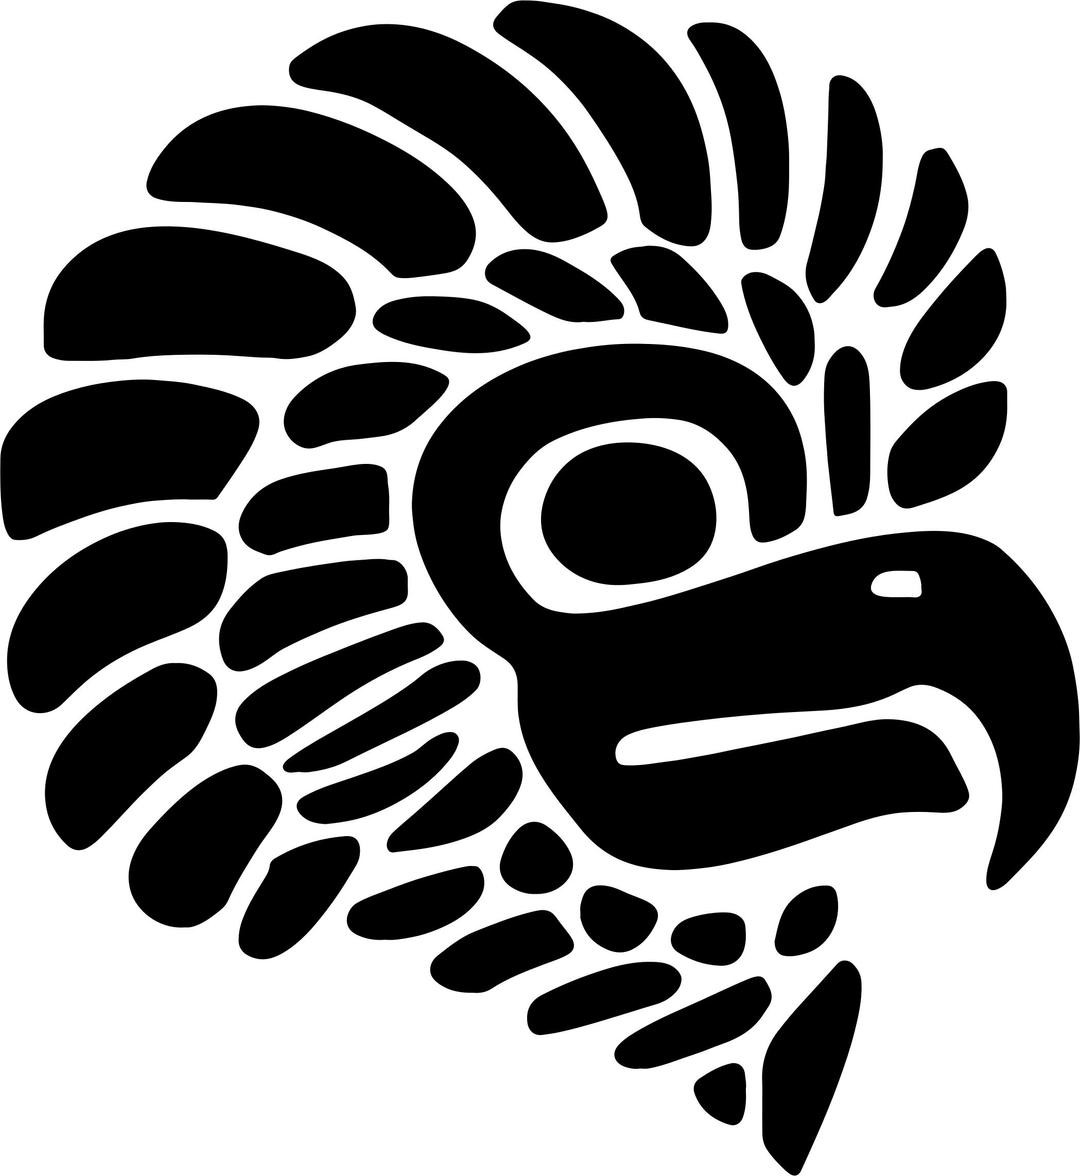 Stylized Mexican Eagle Silhouette png transparent